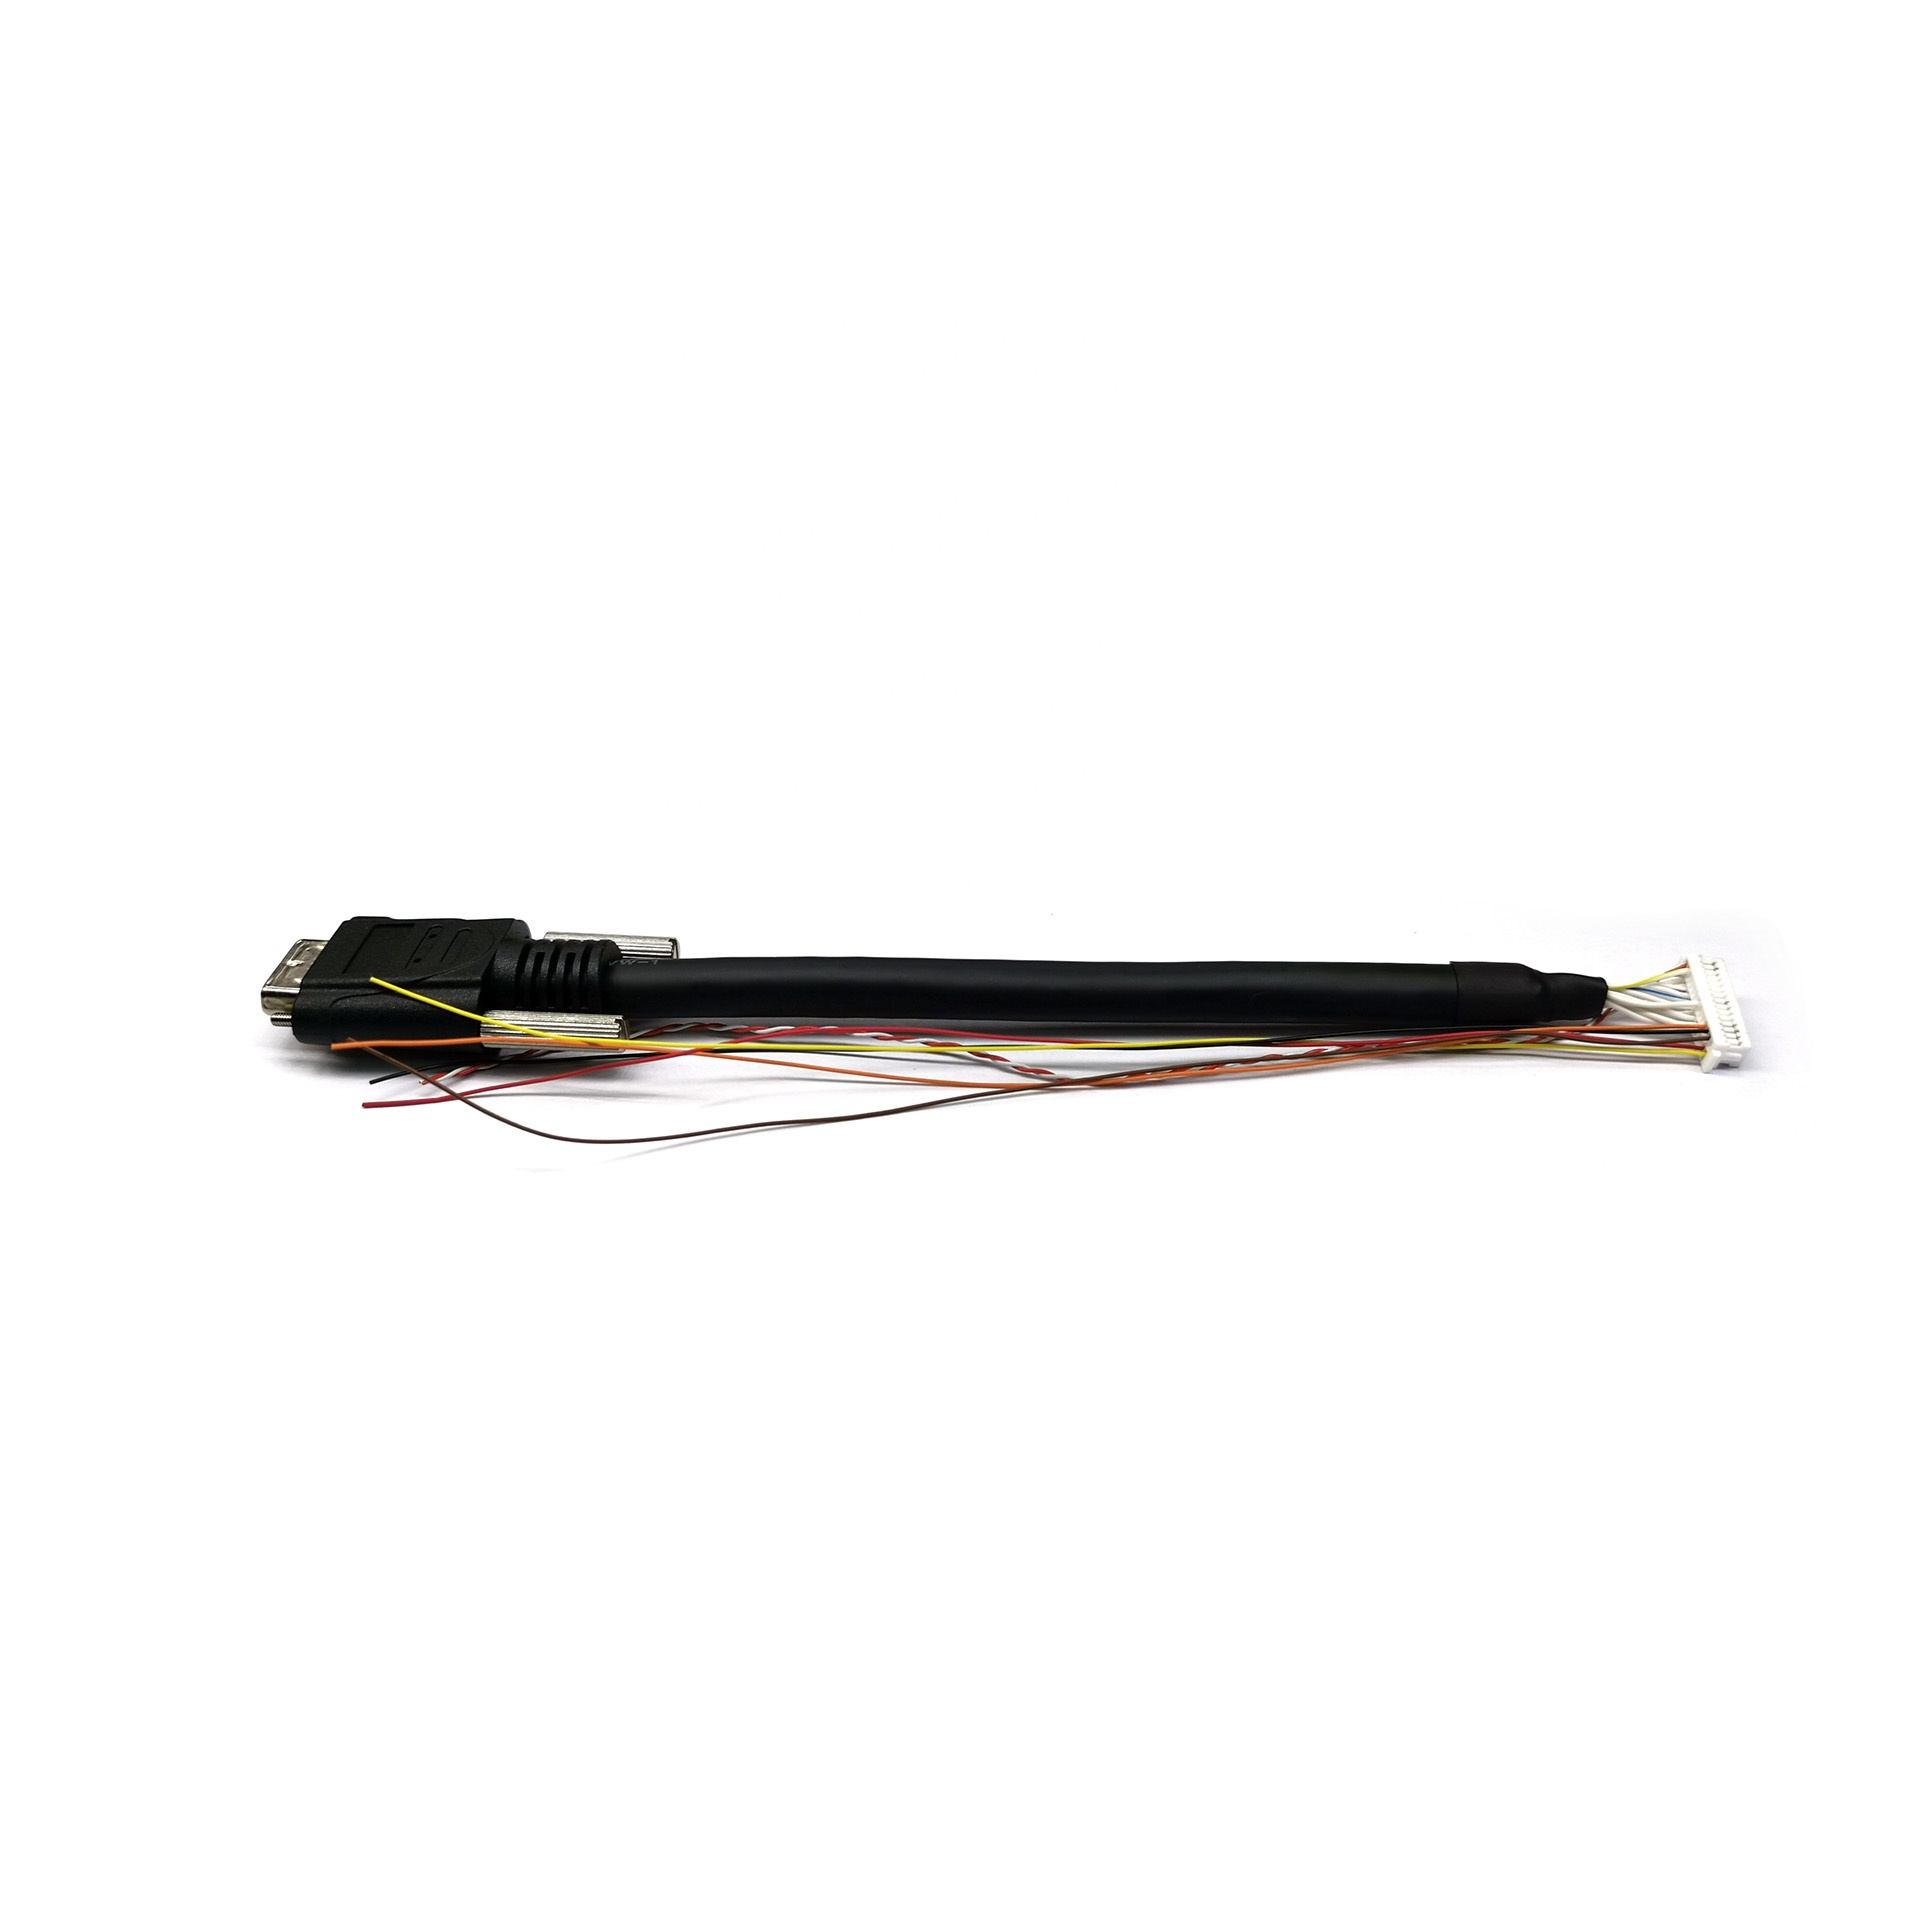 Camera Link SDR male to 2x15P housing cable for industrial cameras